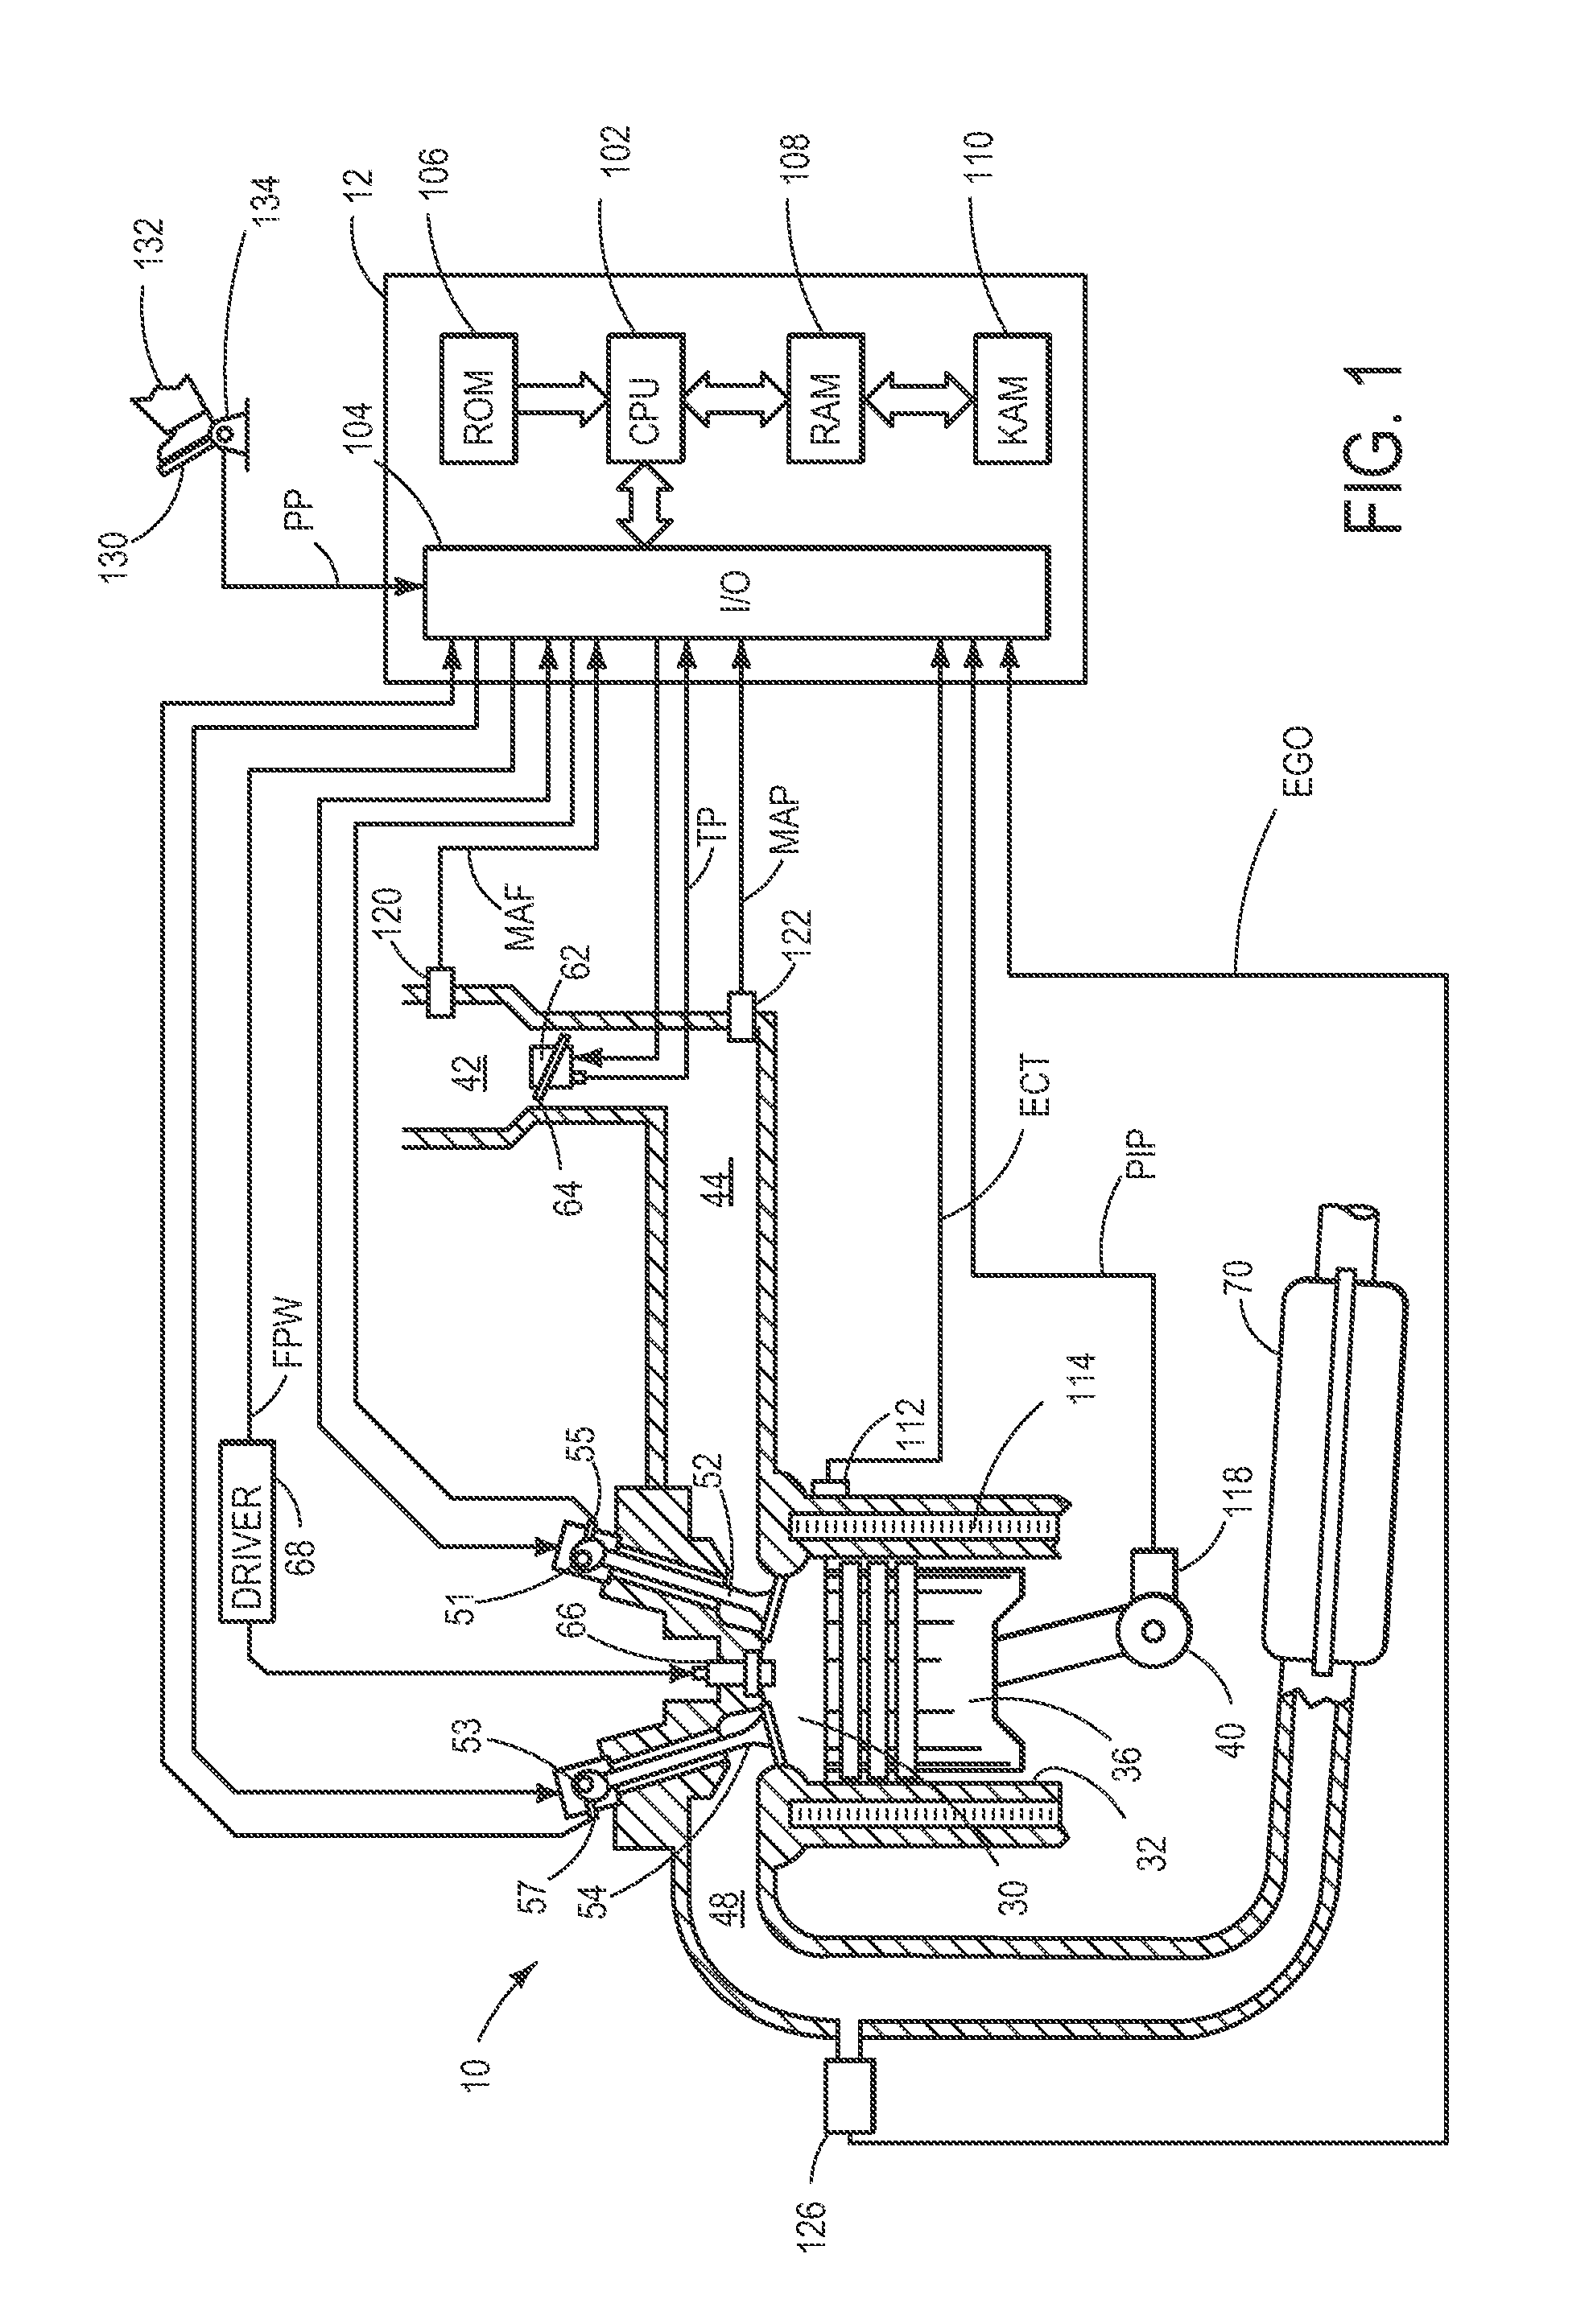 Systems and methods for an exhaust gas treatment system